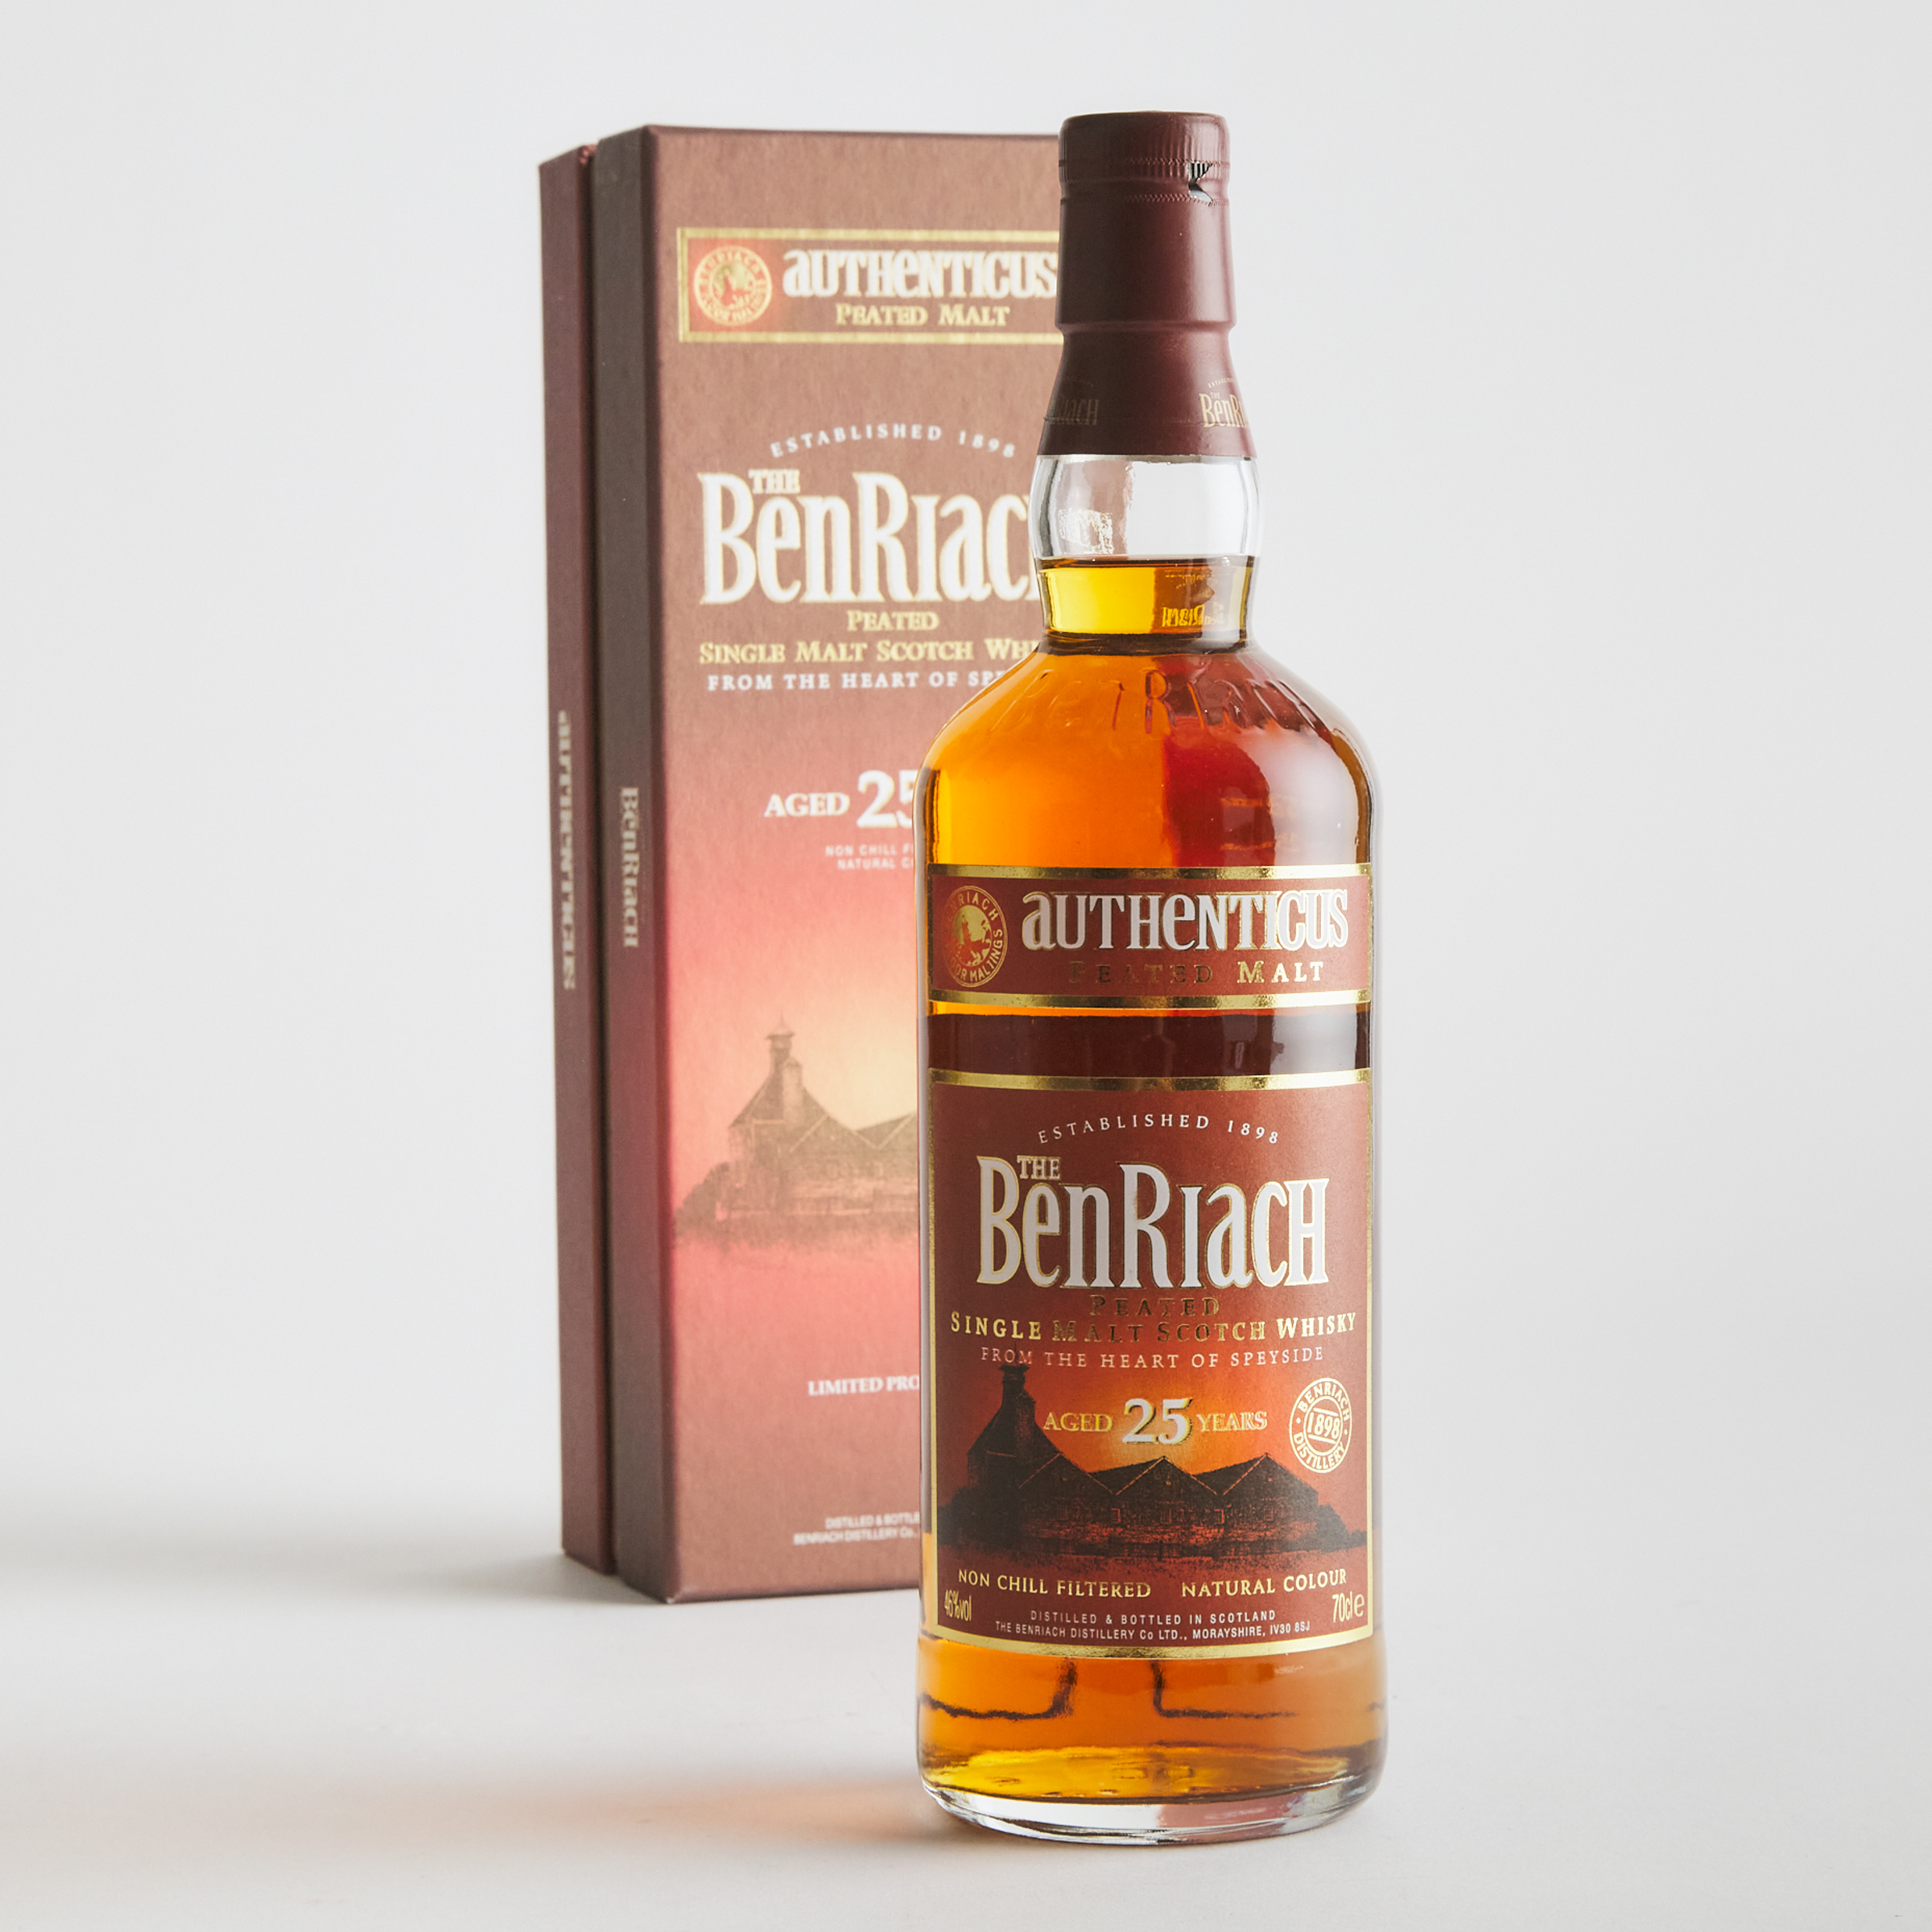 THE BENRIACH SINGLE PEATED MALT SCOTCH WHISKY 25 YEARS (ONE 70 CL)